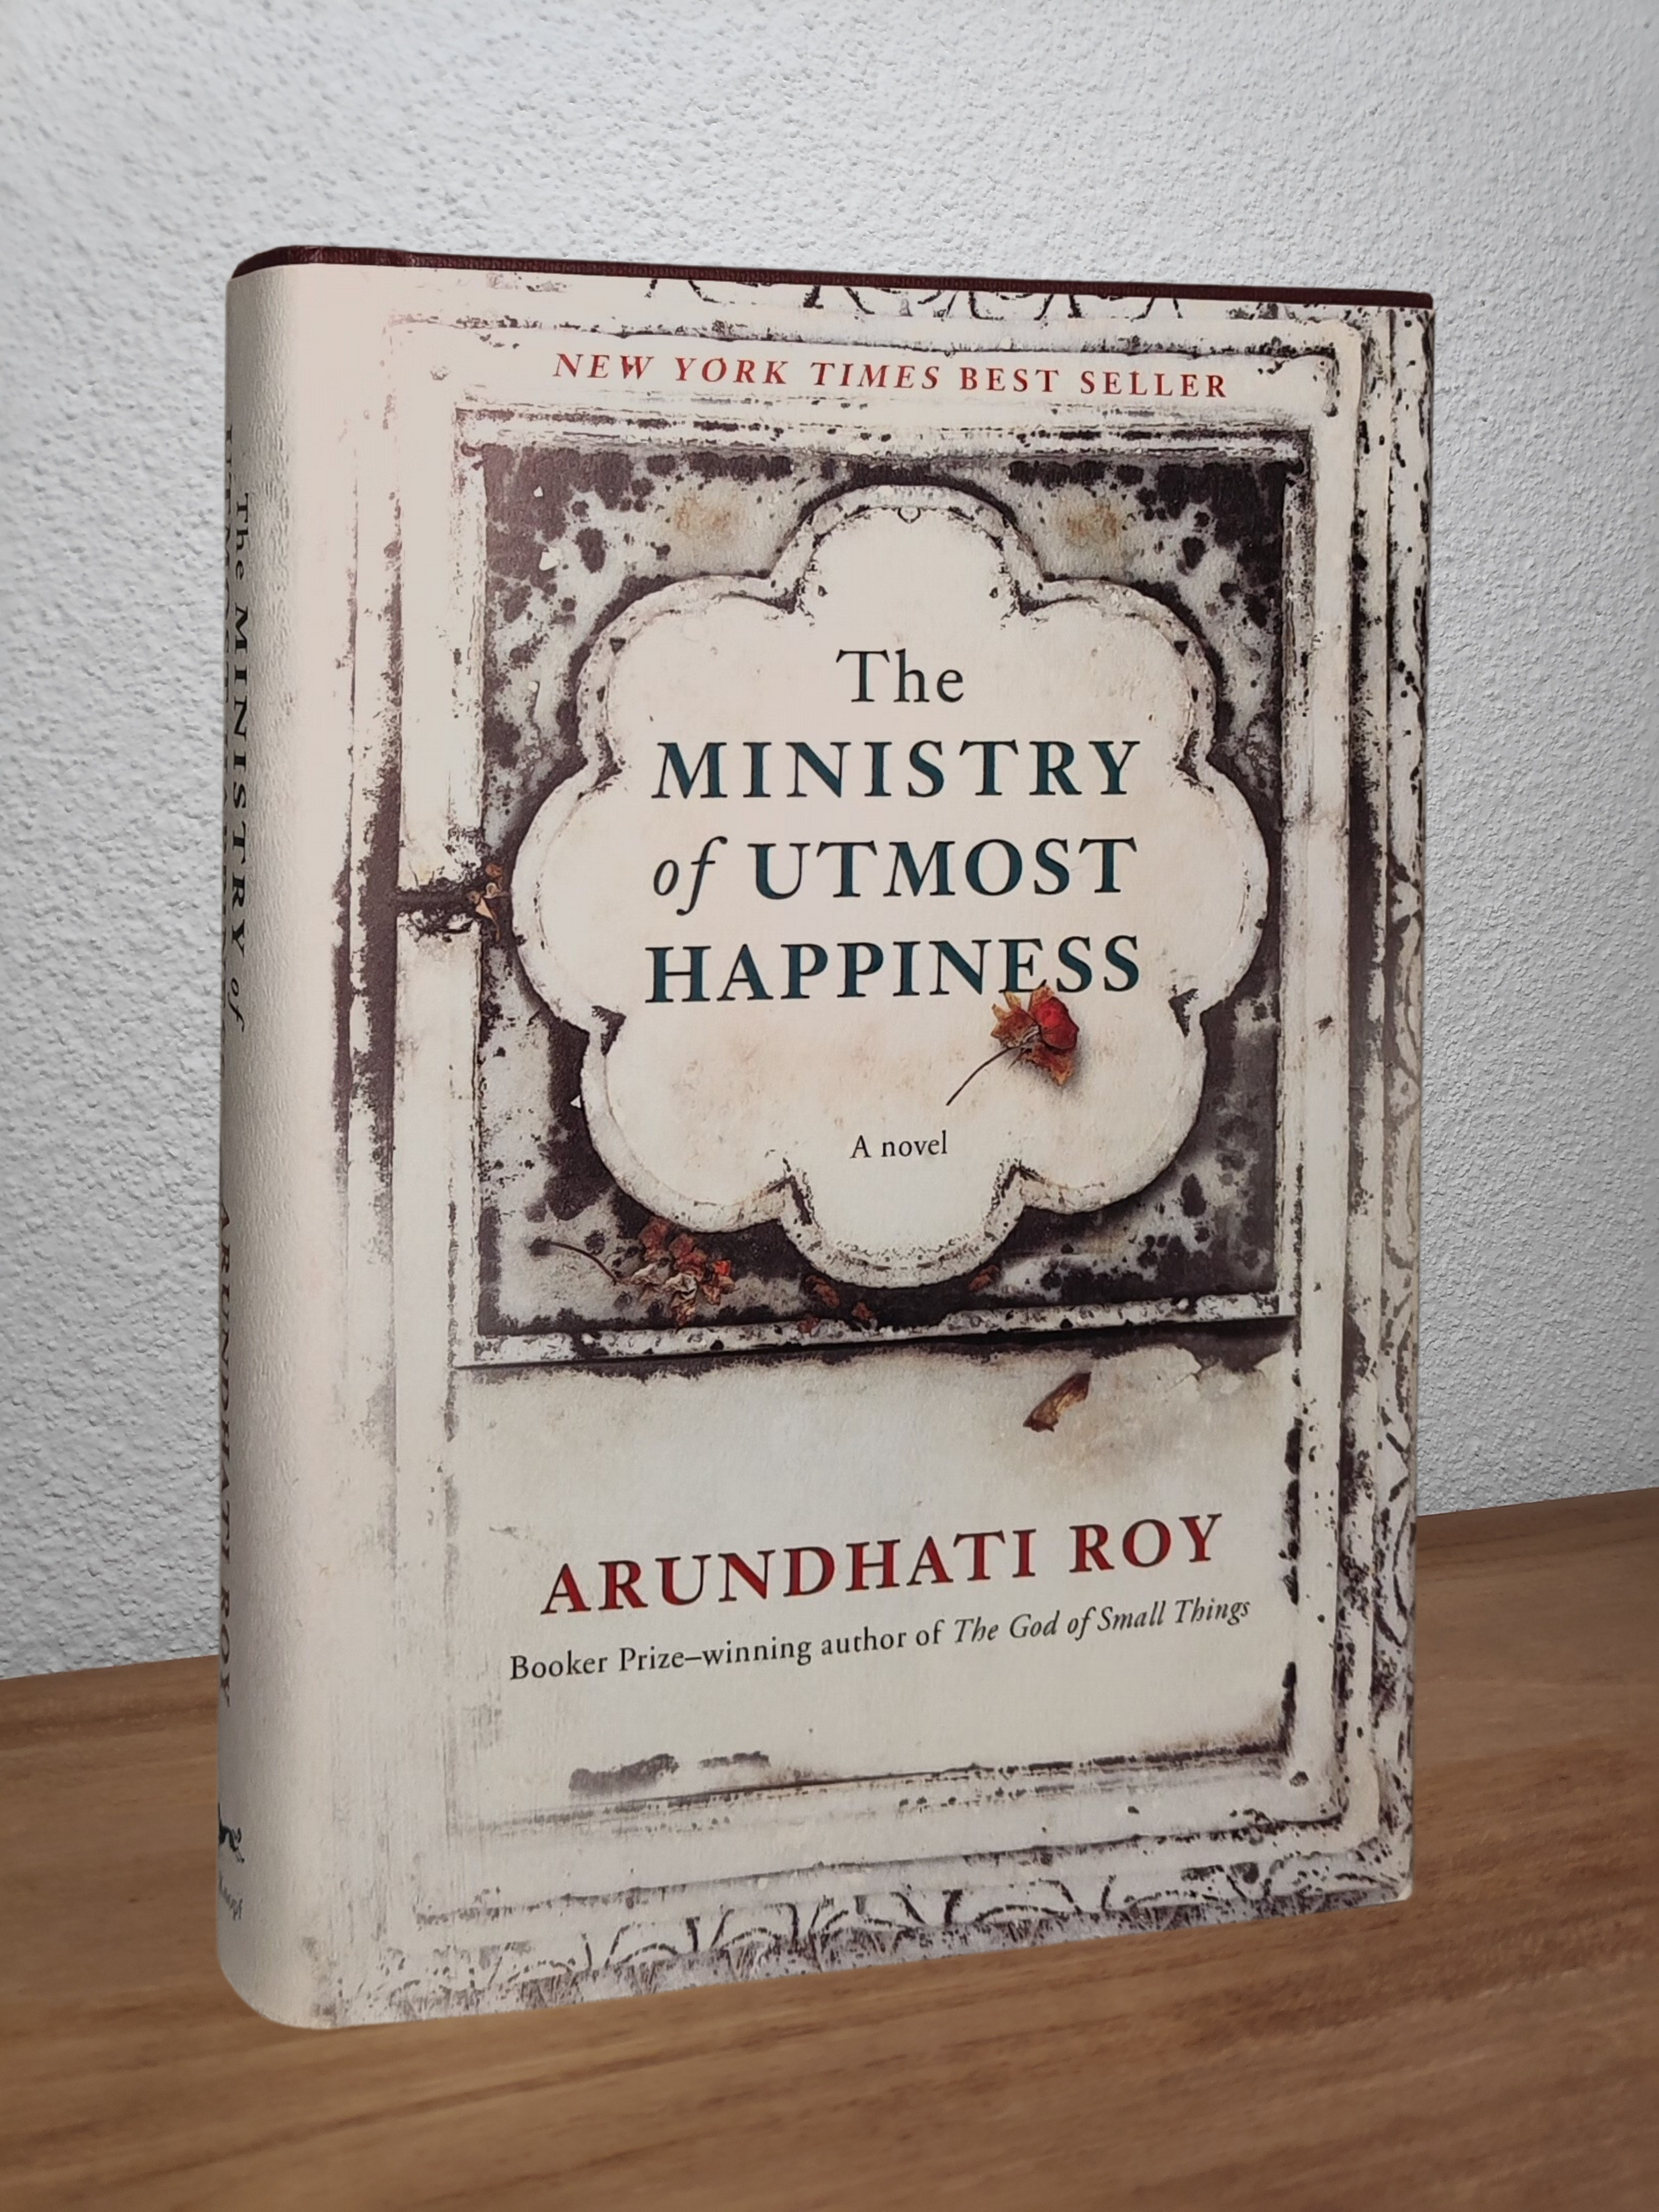 Arundhati Roy - The Ministry of Utmost Happiness - Second-hand english book to deliver in Zurich & Switzerland